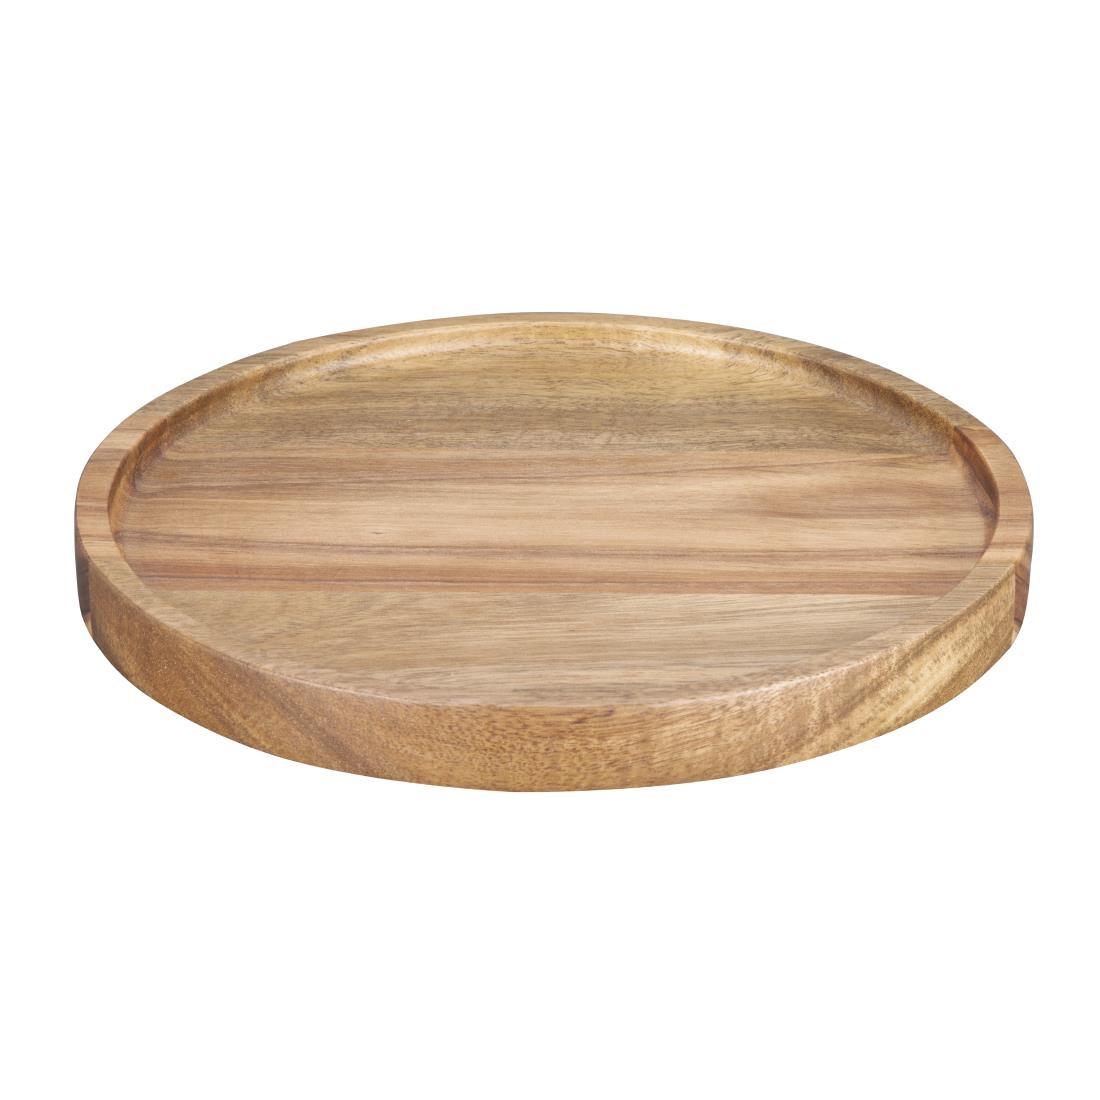 Olympia Acacia Round Plates 200(D)mm - FT611  - 1